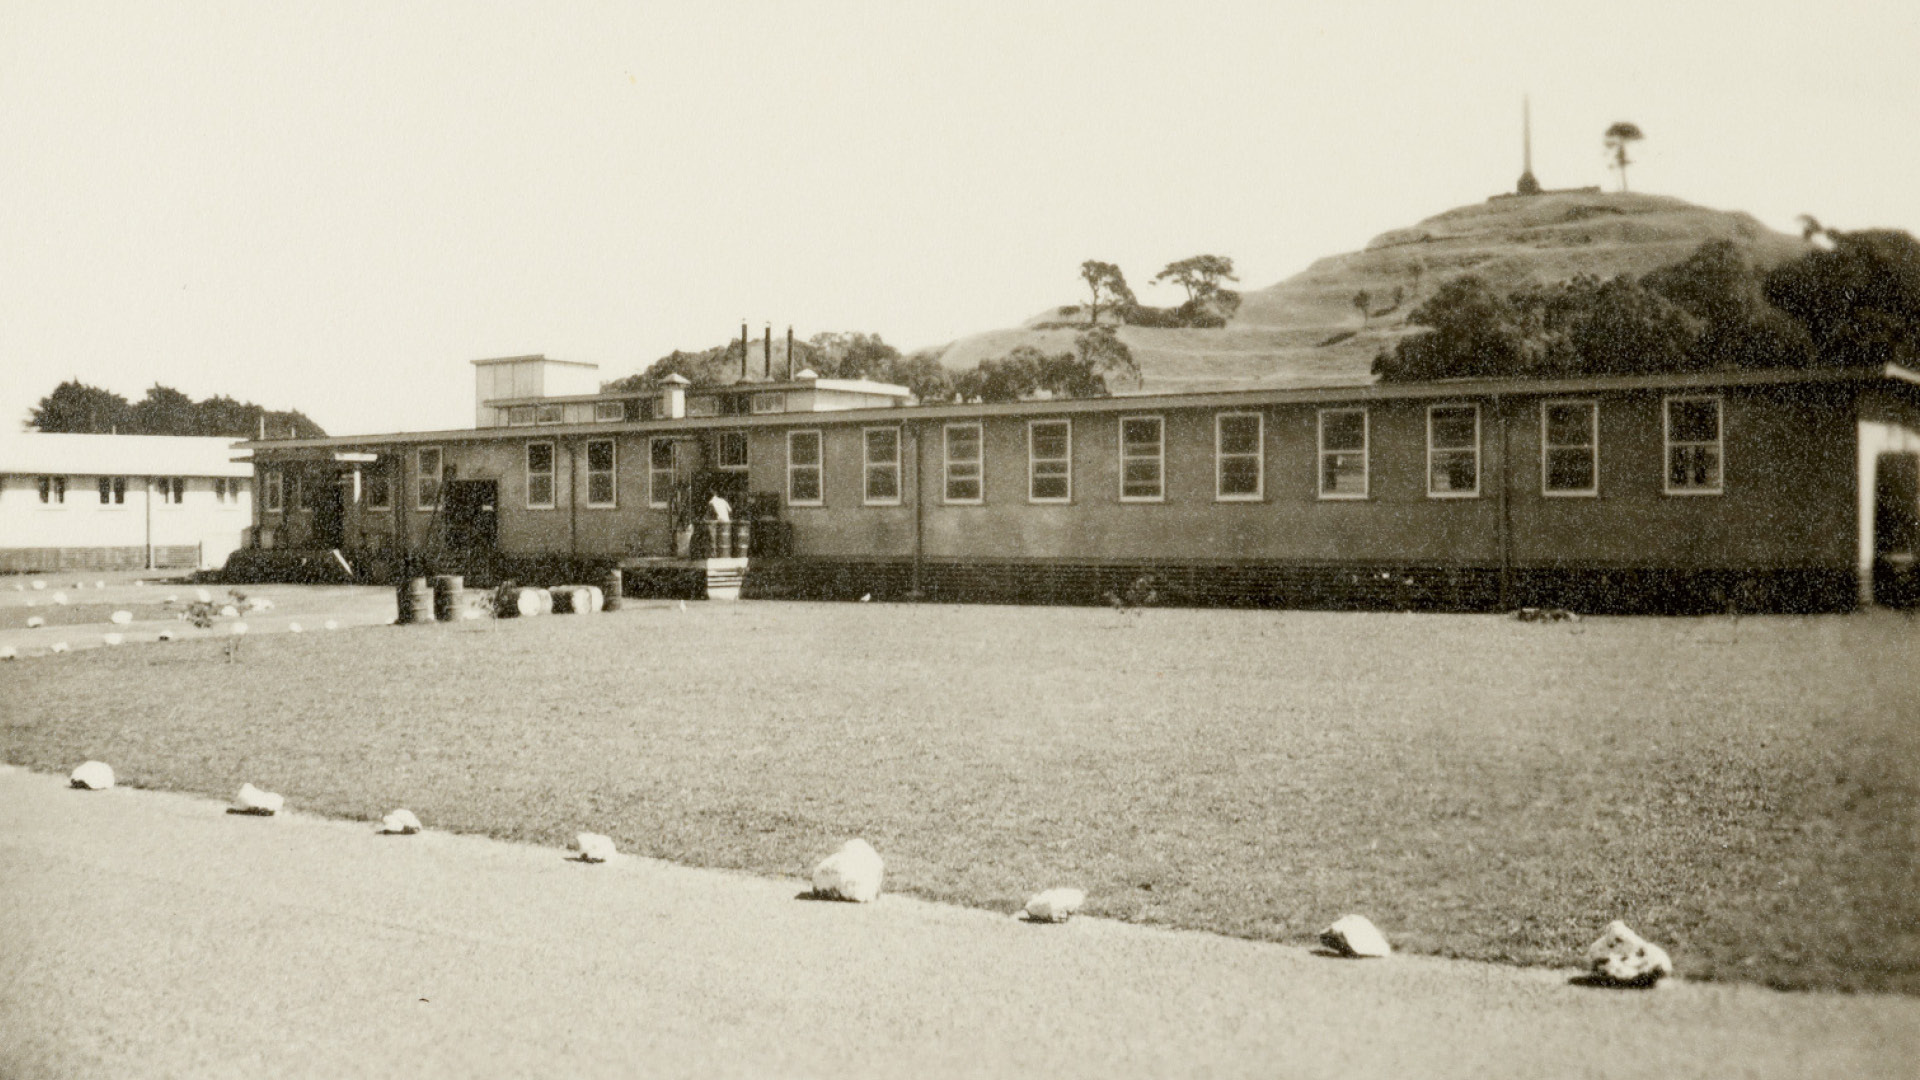 39th General United States Army Hospital. Hospital buildings, Maungakiekie in background. Cornwall Park Trust Board (Inc). Donated by R. Weinberg.